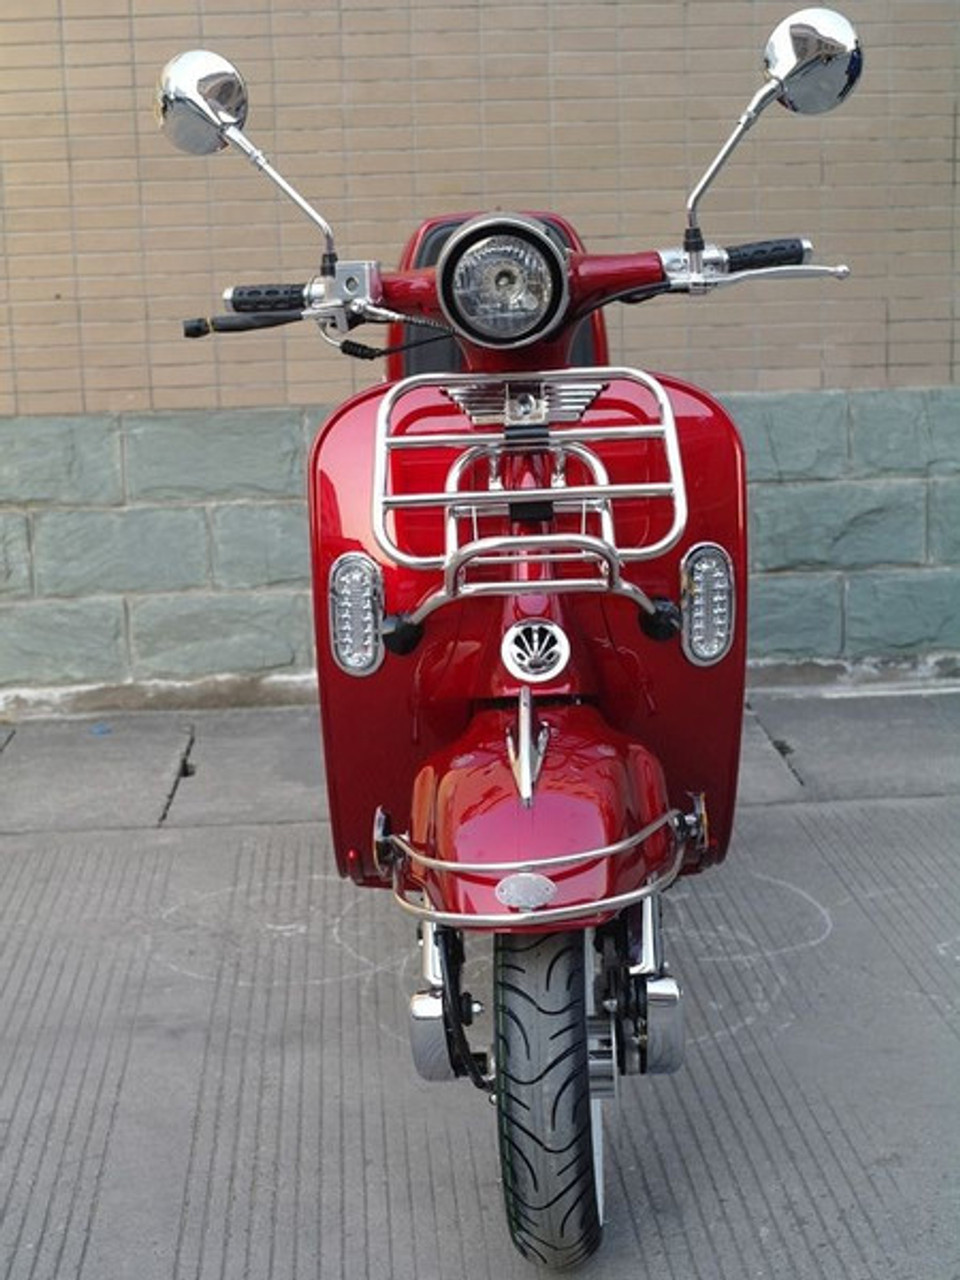 DongFang Romeo 200 (ROMEO-200-RD) Gas Moped Scooter, Automatic CVT Big Power Engine, Retro Style